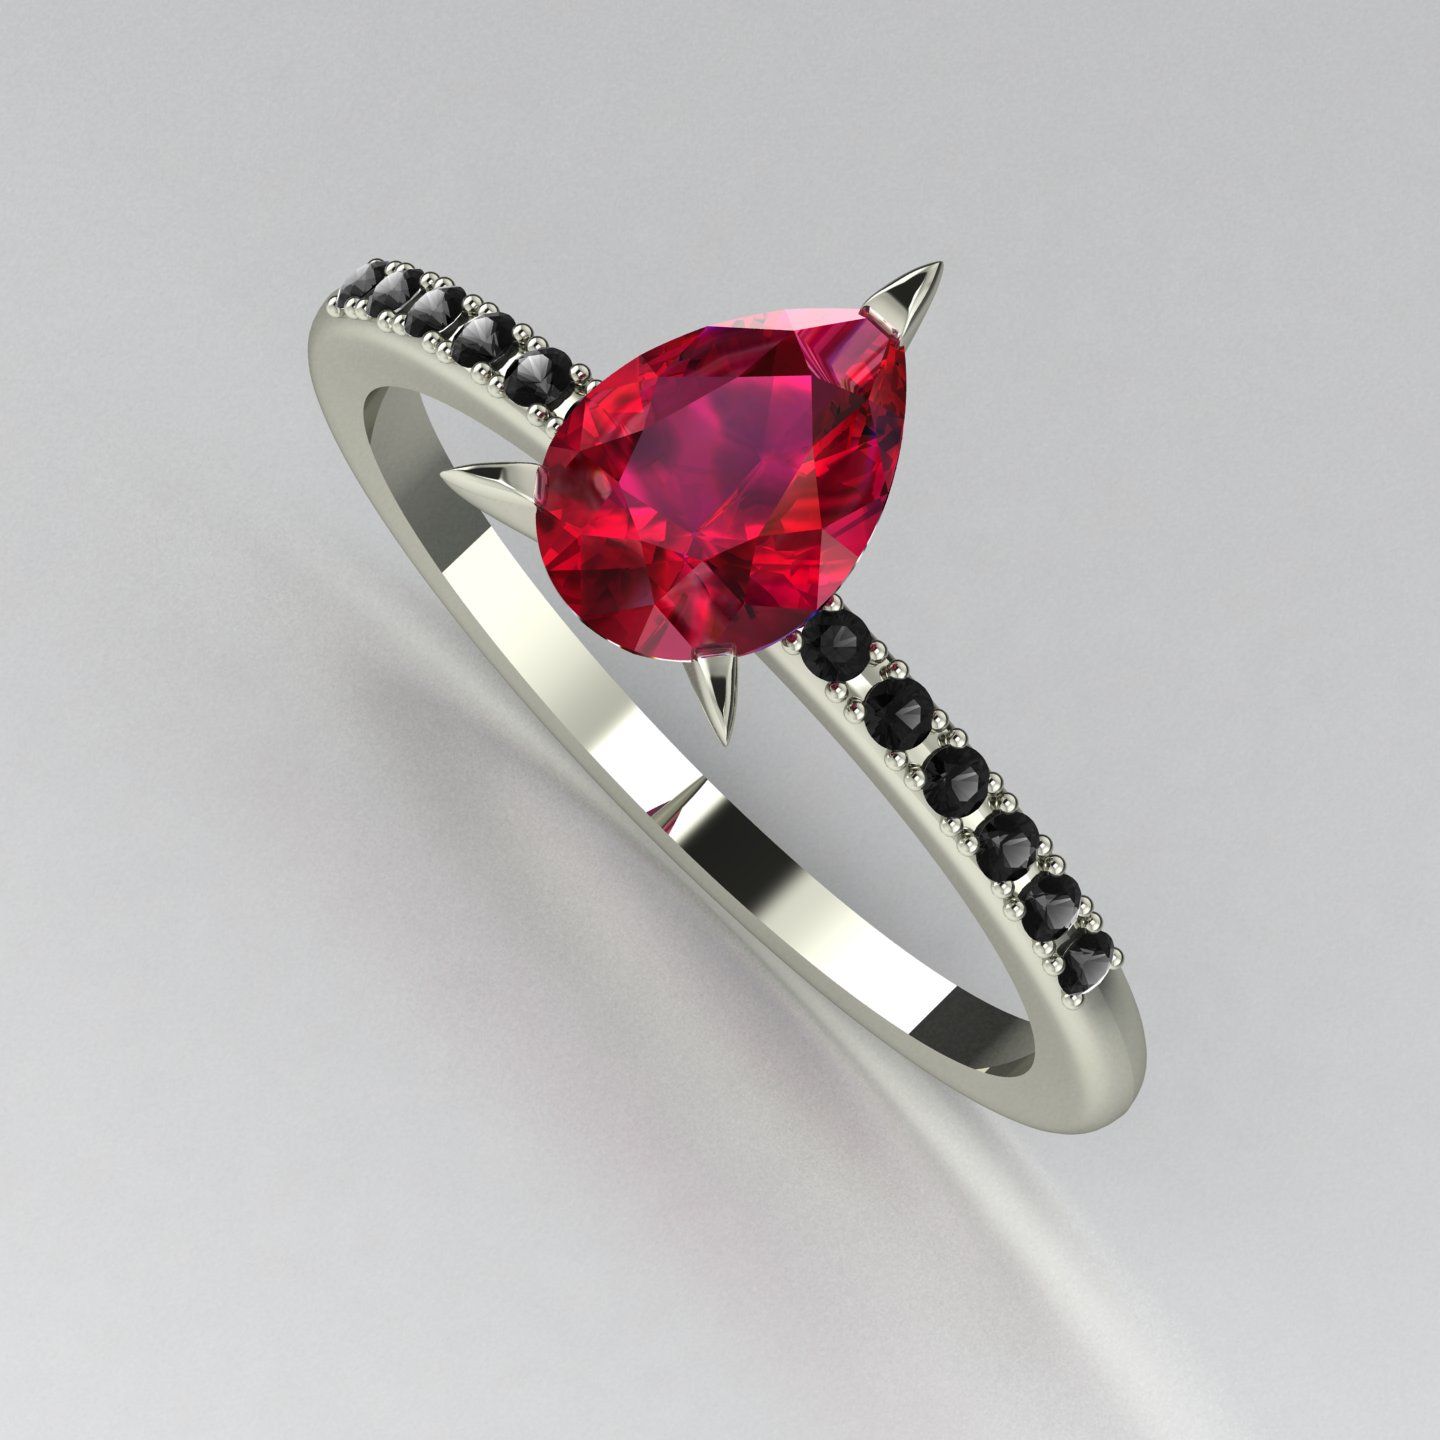 Ruby and black diamond Calista engagement ring